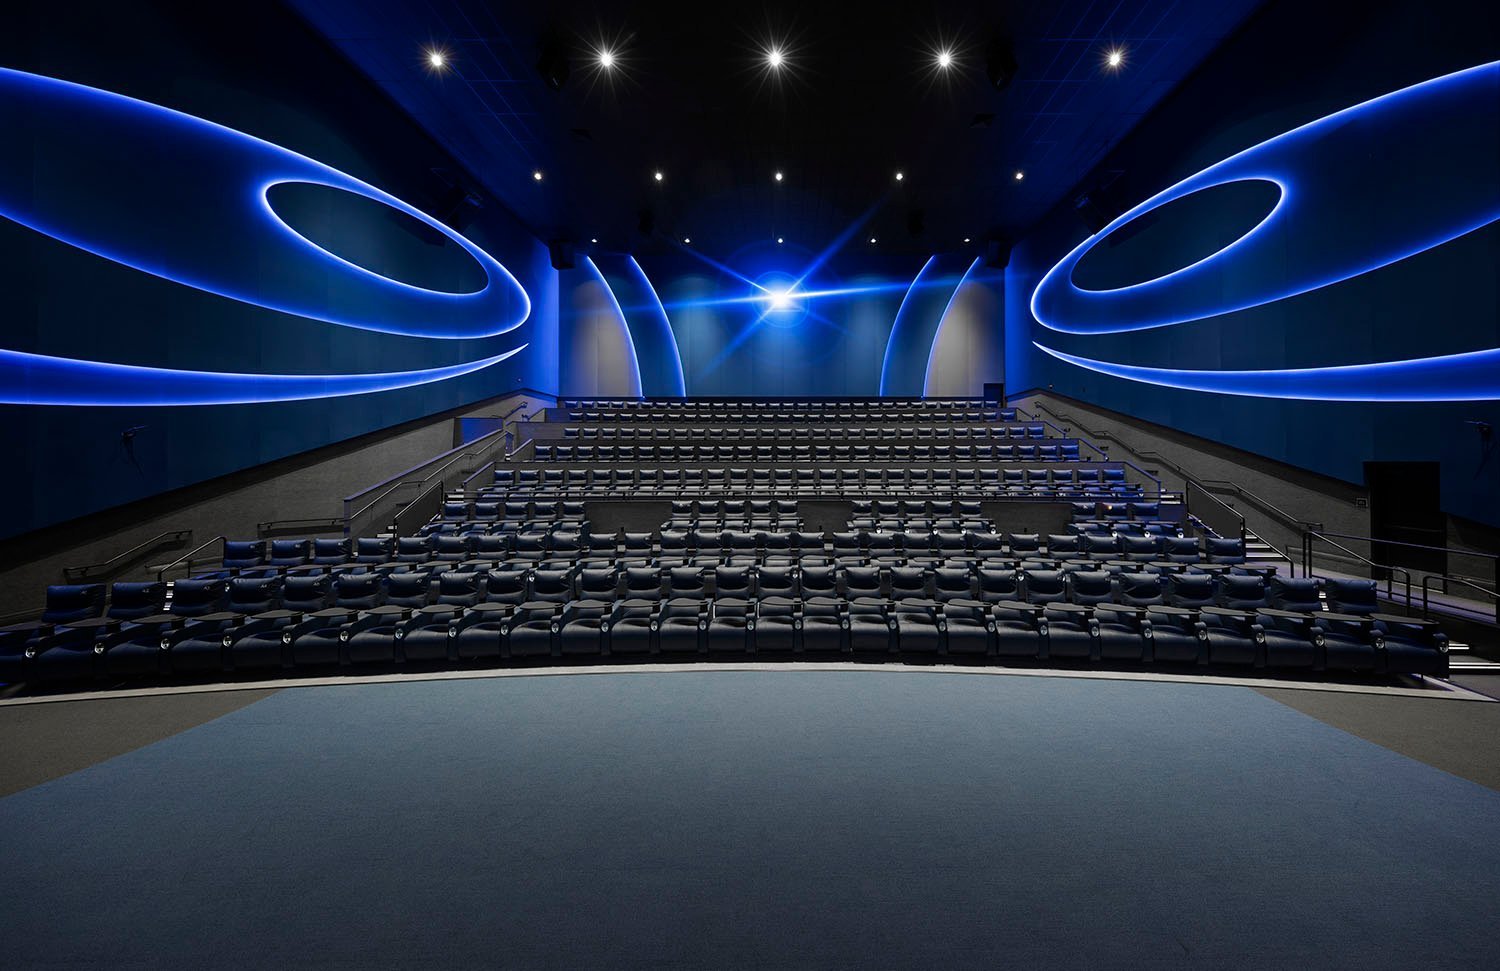 Dine In Imax theater near Los Angeles